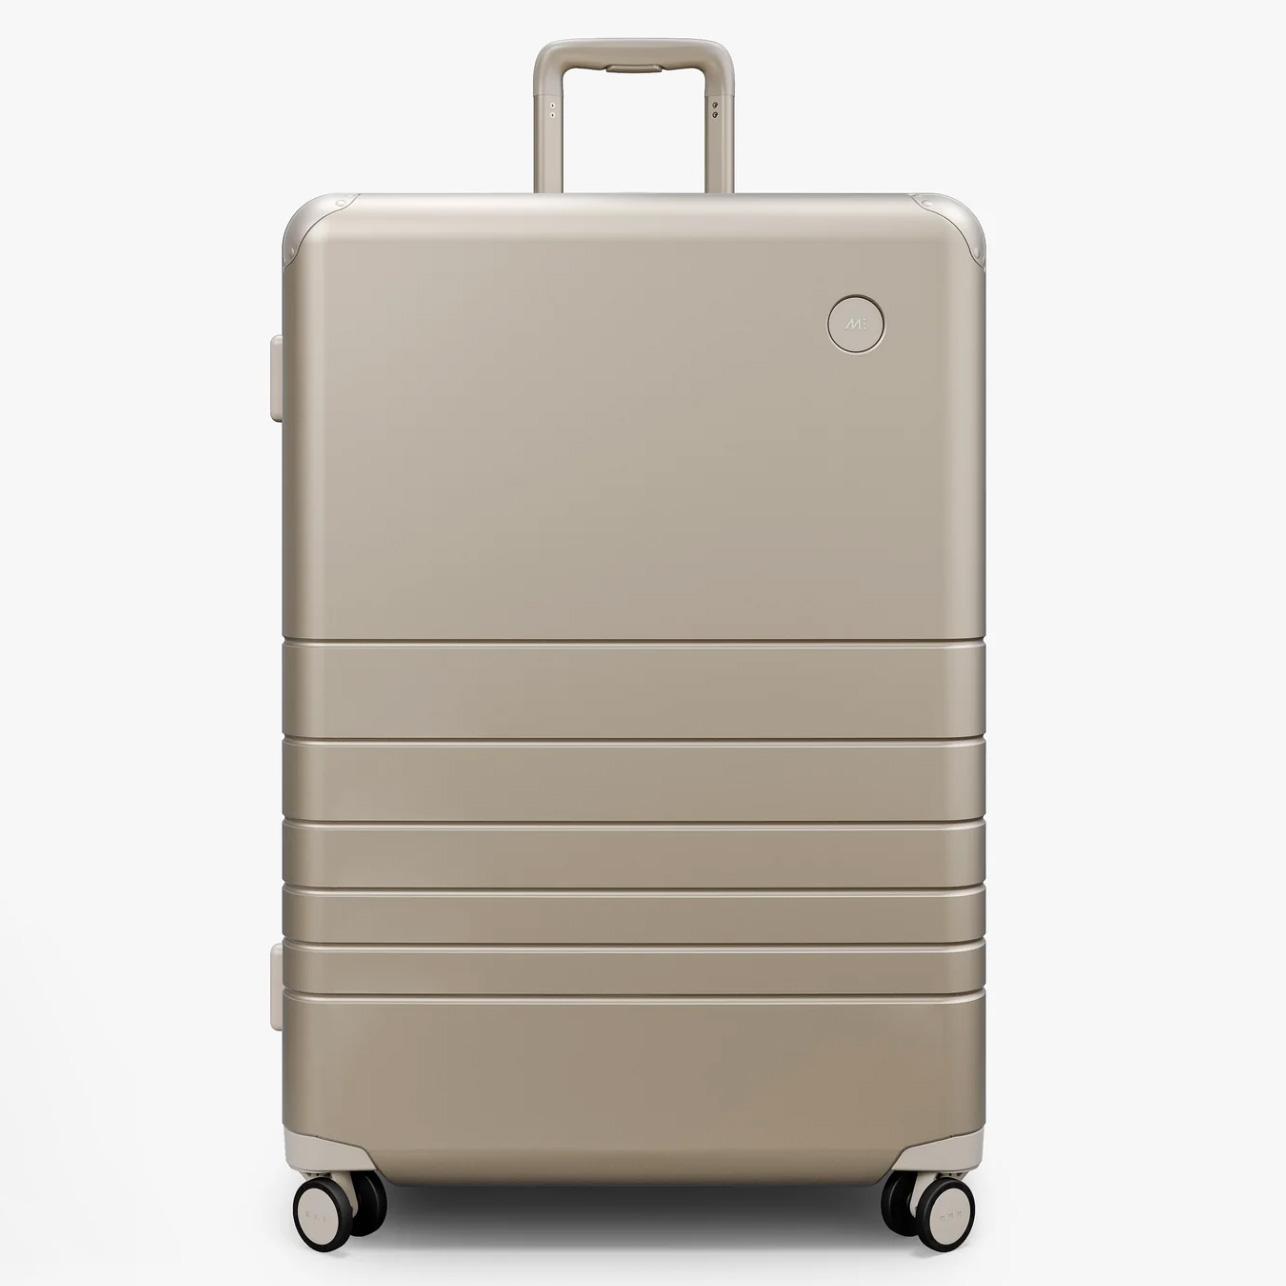 Monos hardside luggage in champagne